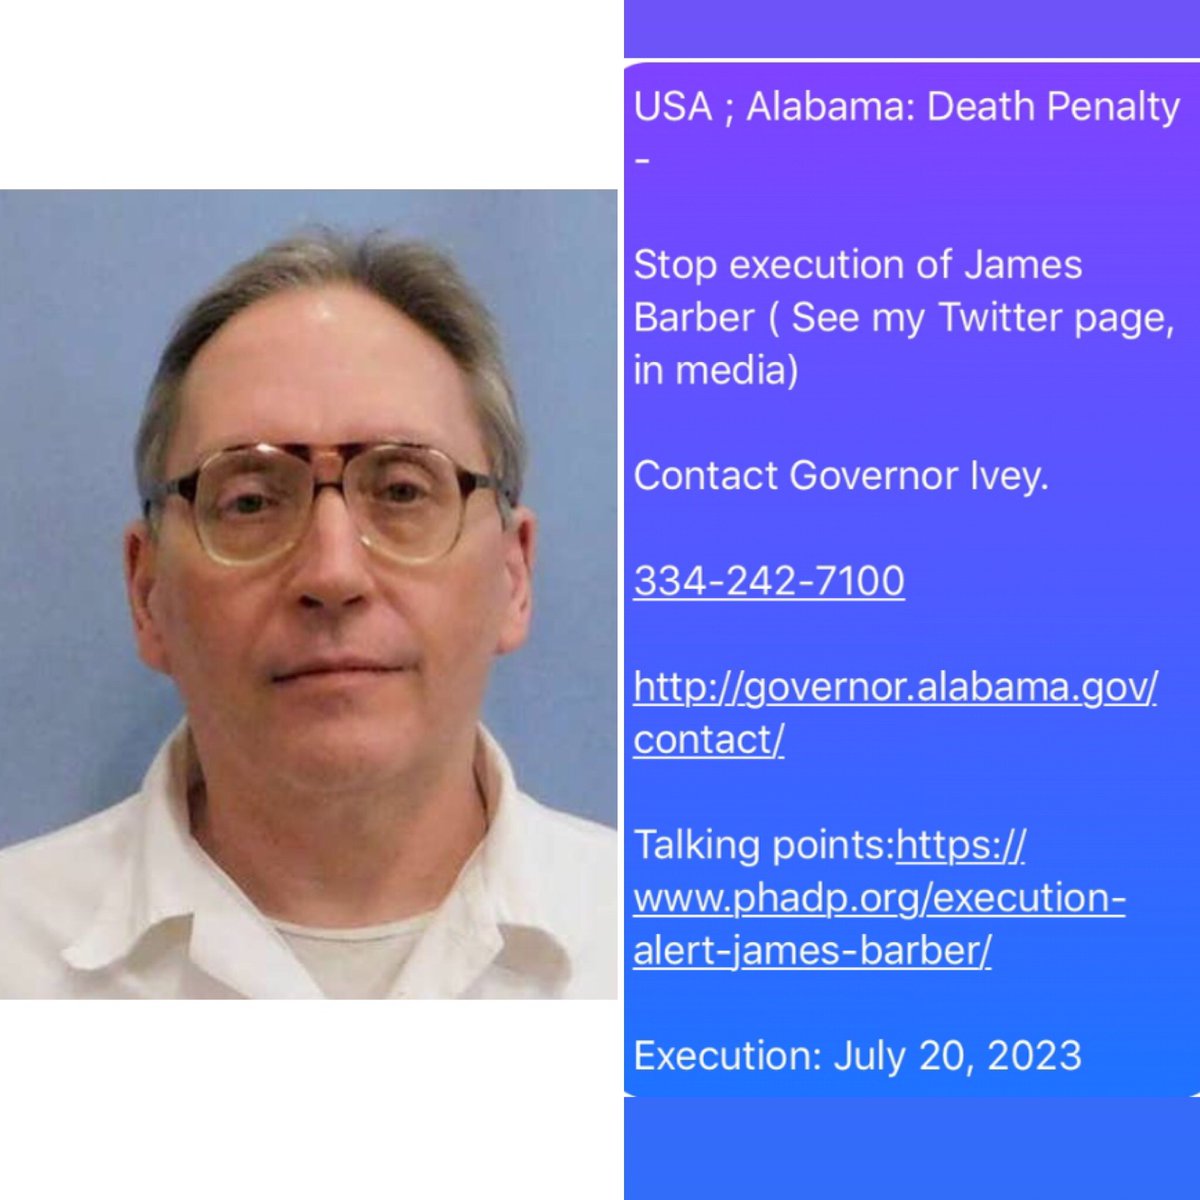 #Alabama

Stop execution of #JamesBarber ( See my Twitter page, in media)

Contact Gov  Ivey.

334-242-7100

governor.alabama.gov/contact/

Talking points:phadp.org/execution-aler…

Execution: July 20, 2023